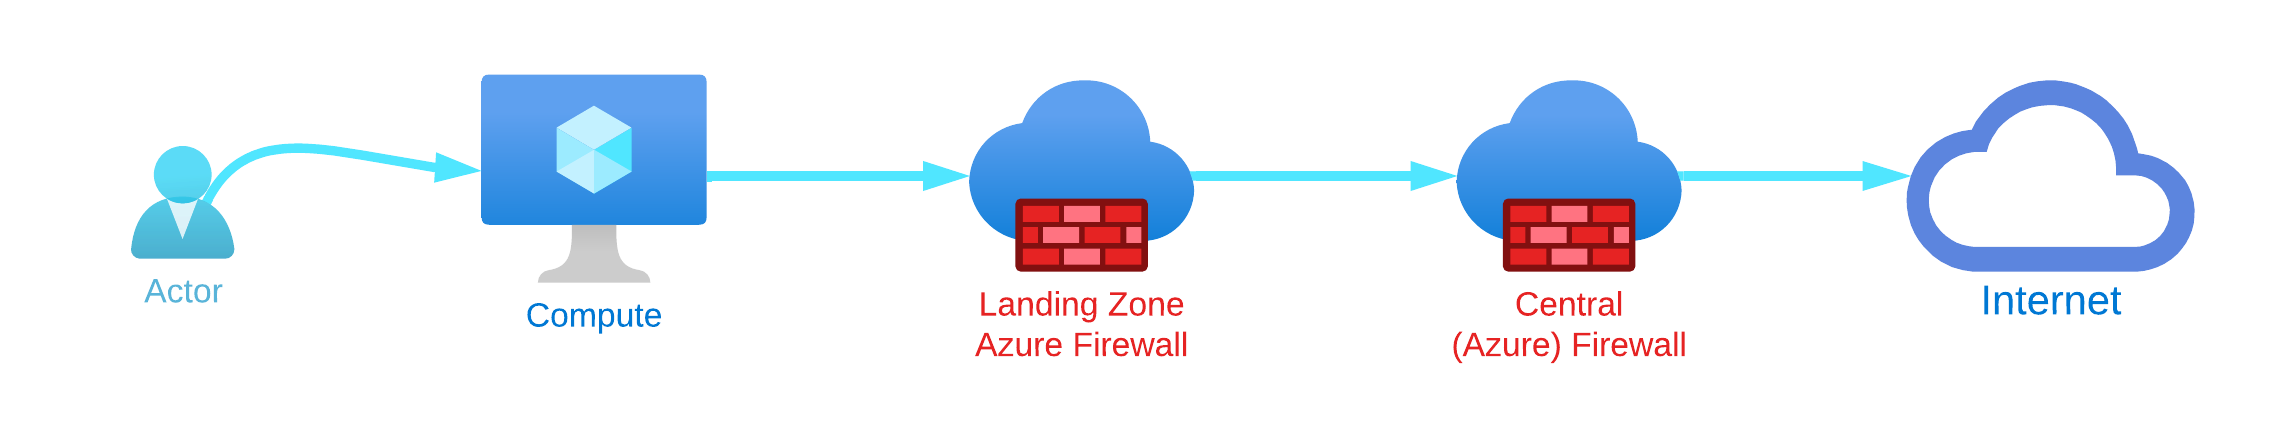 Double Firewall Overview